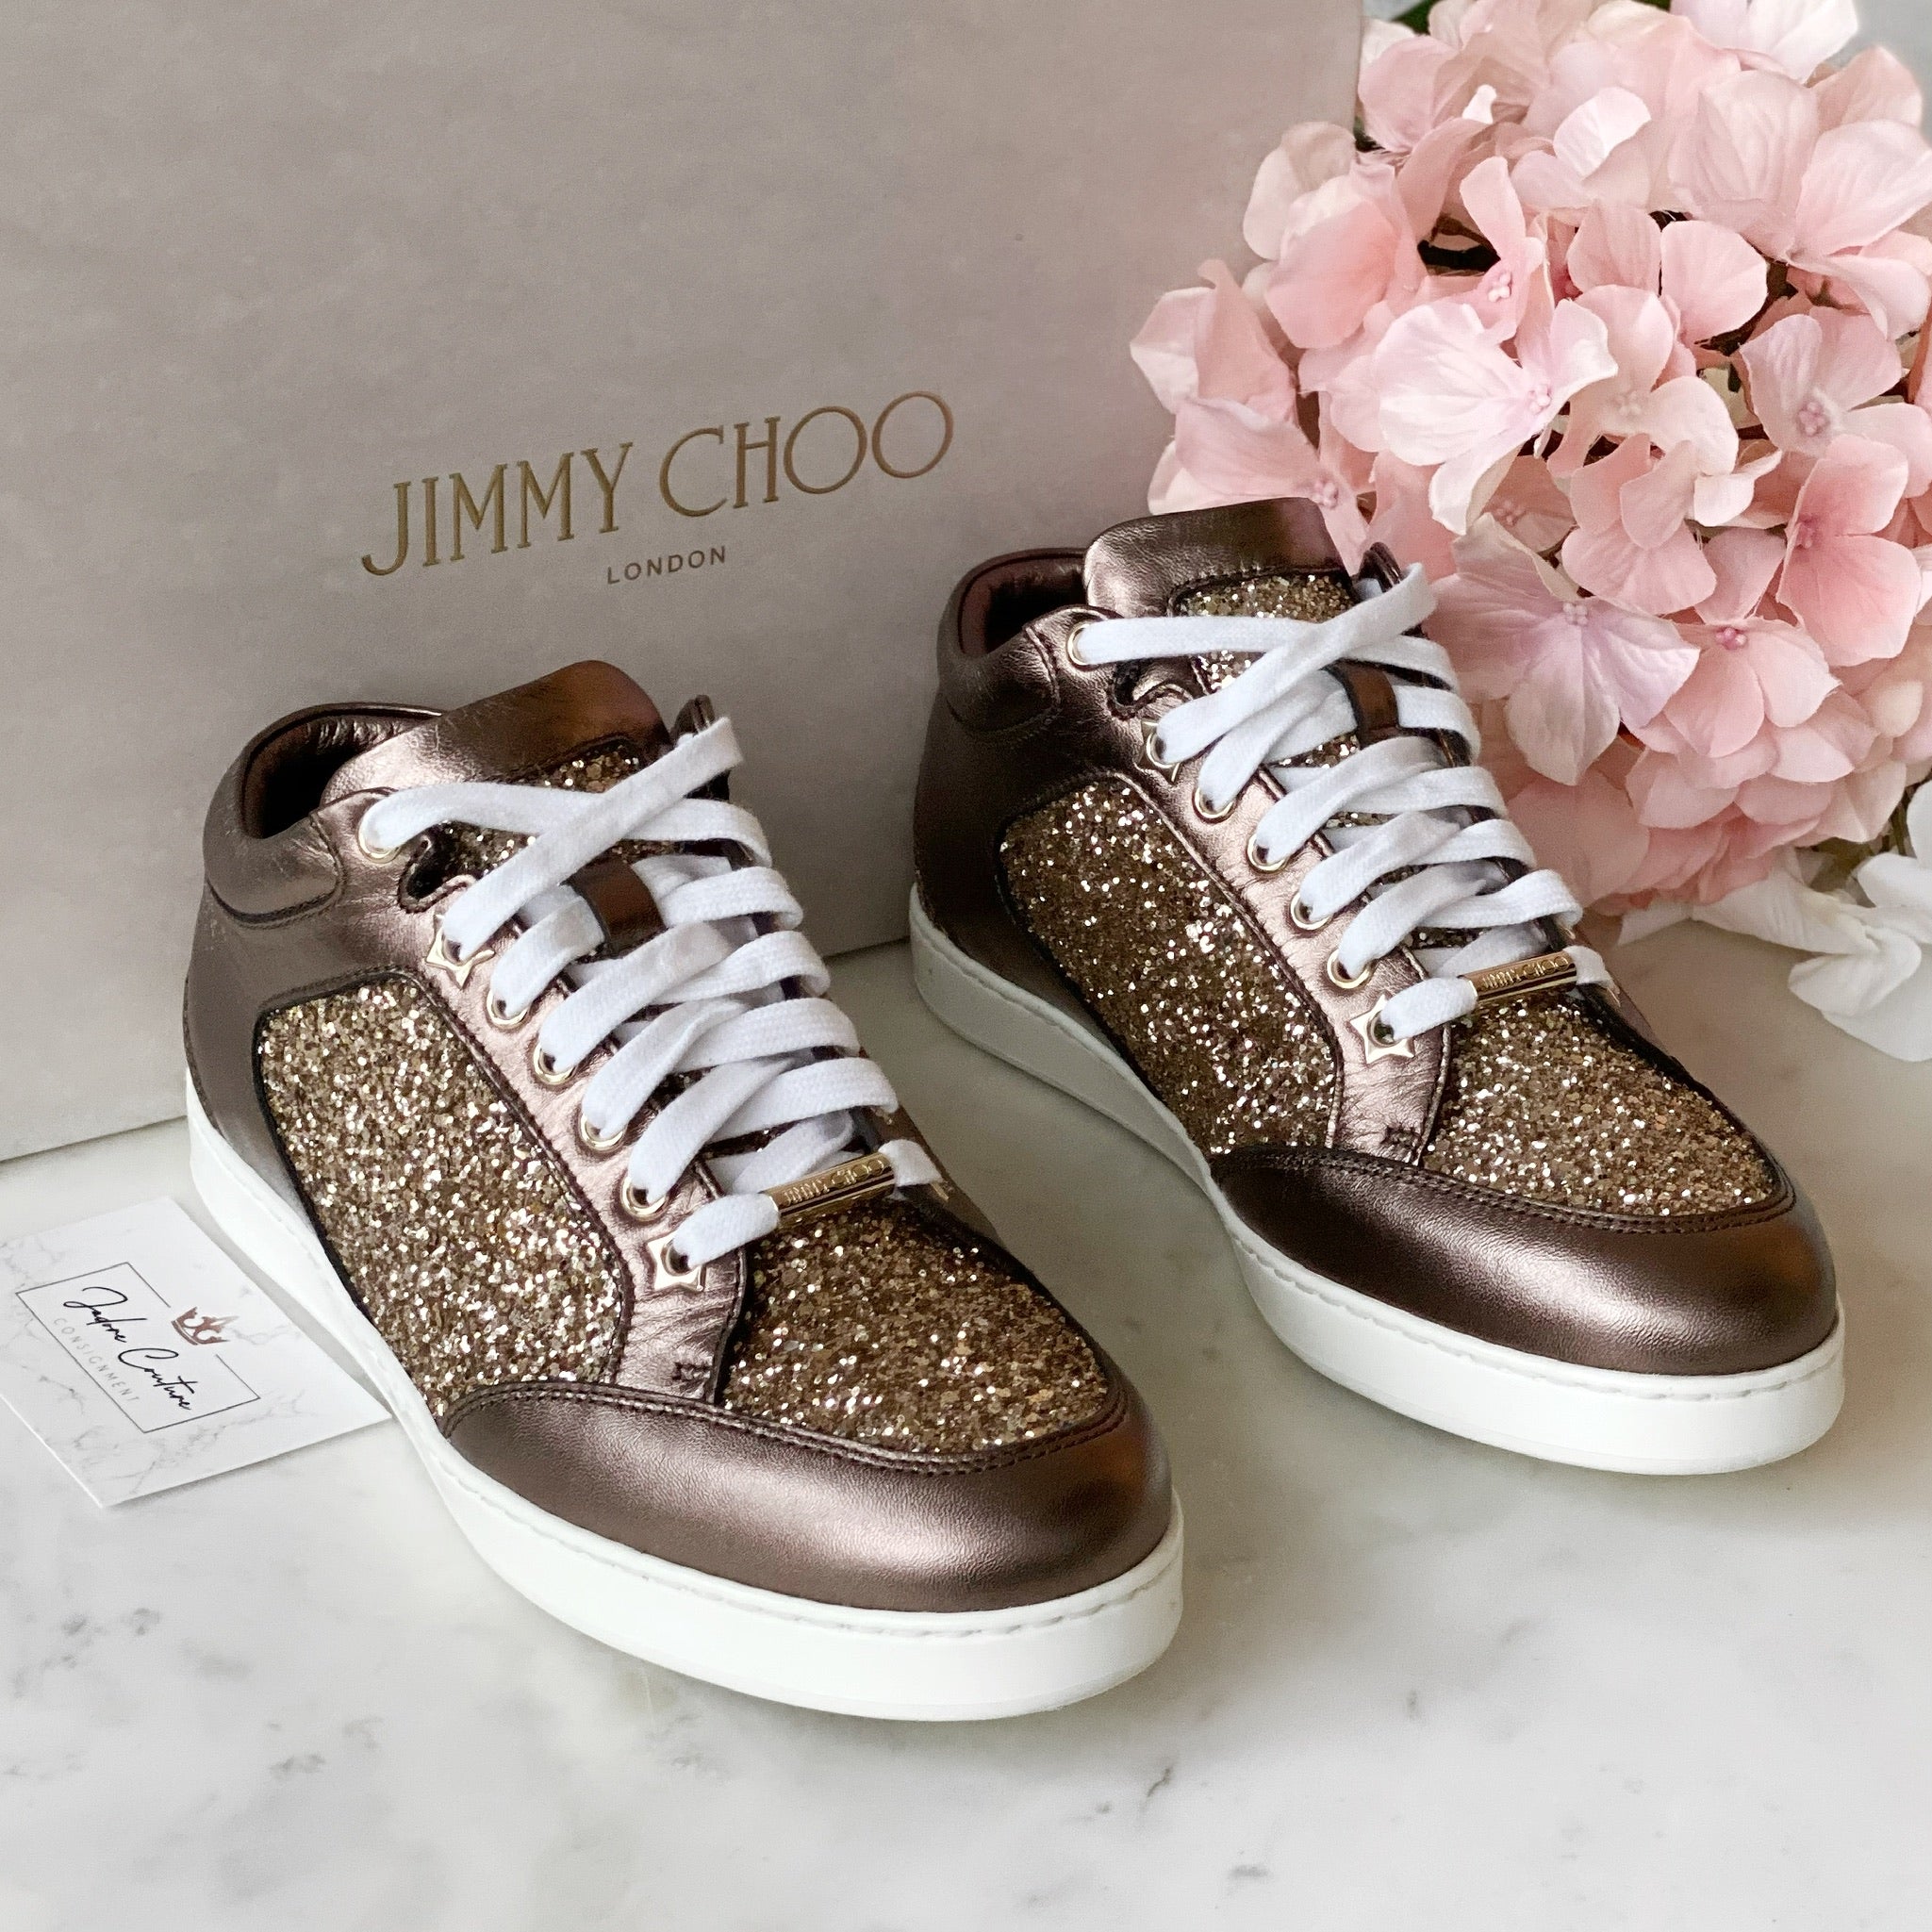 Jimmy Choo Antique Gold Glitter Miami Sneakers 37